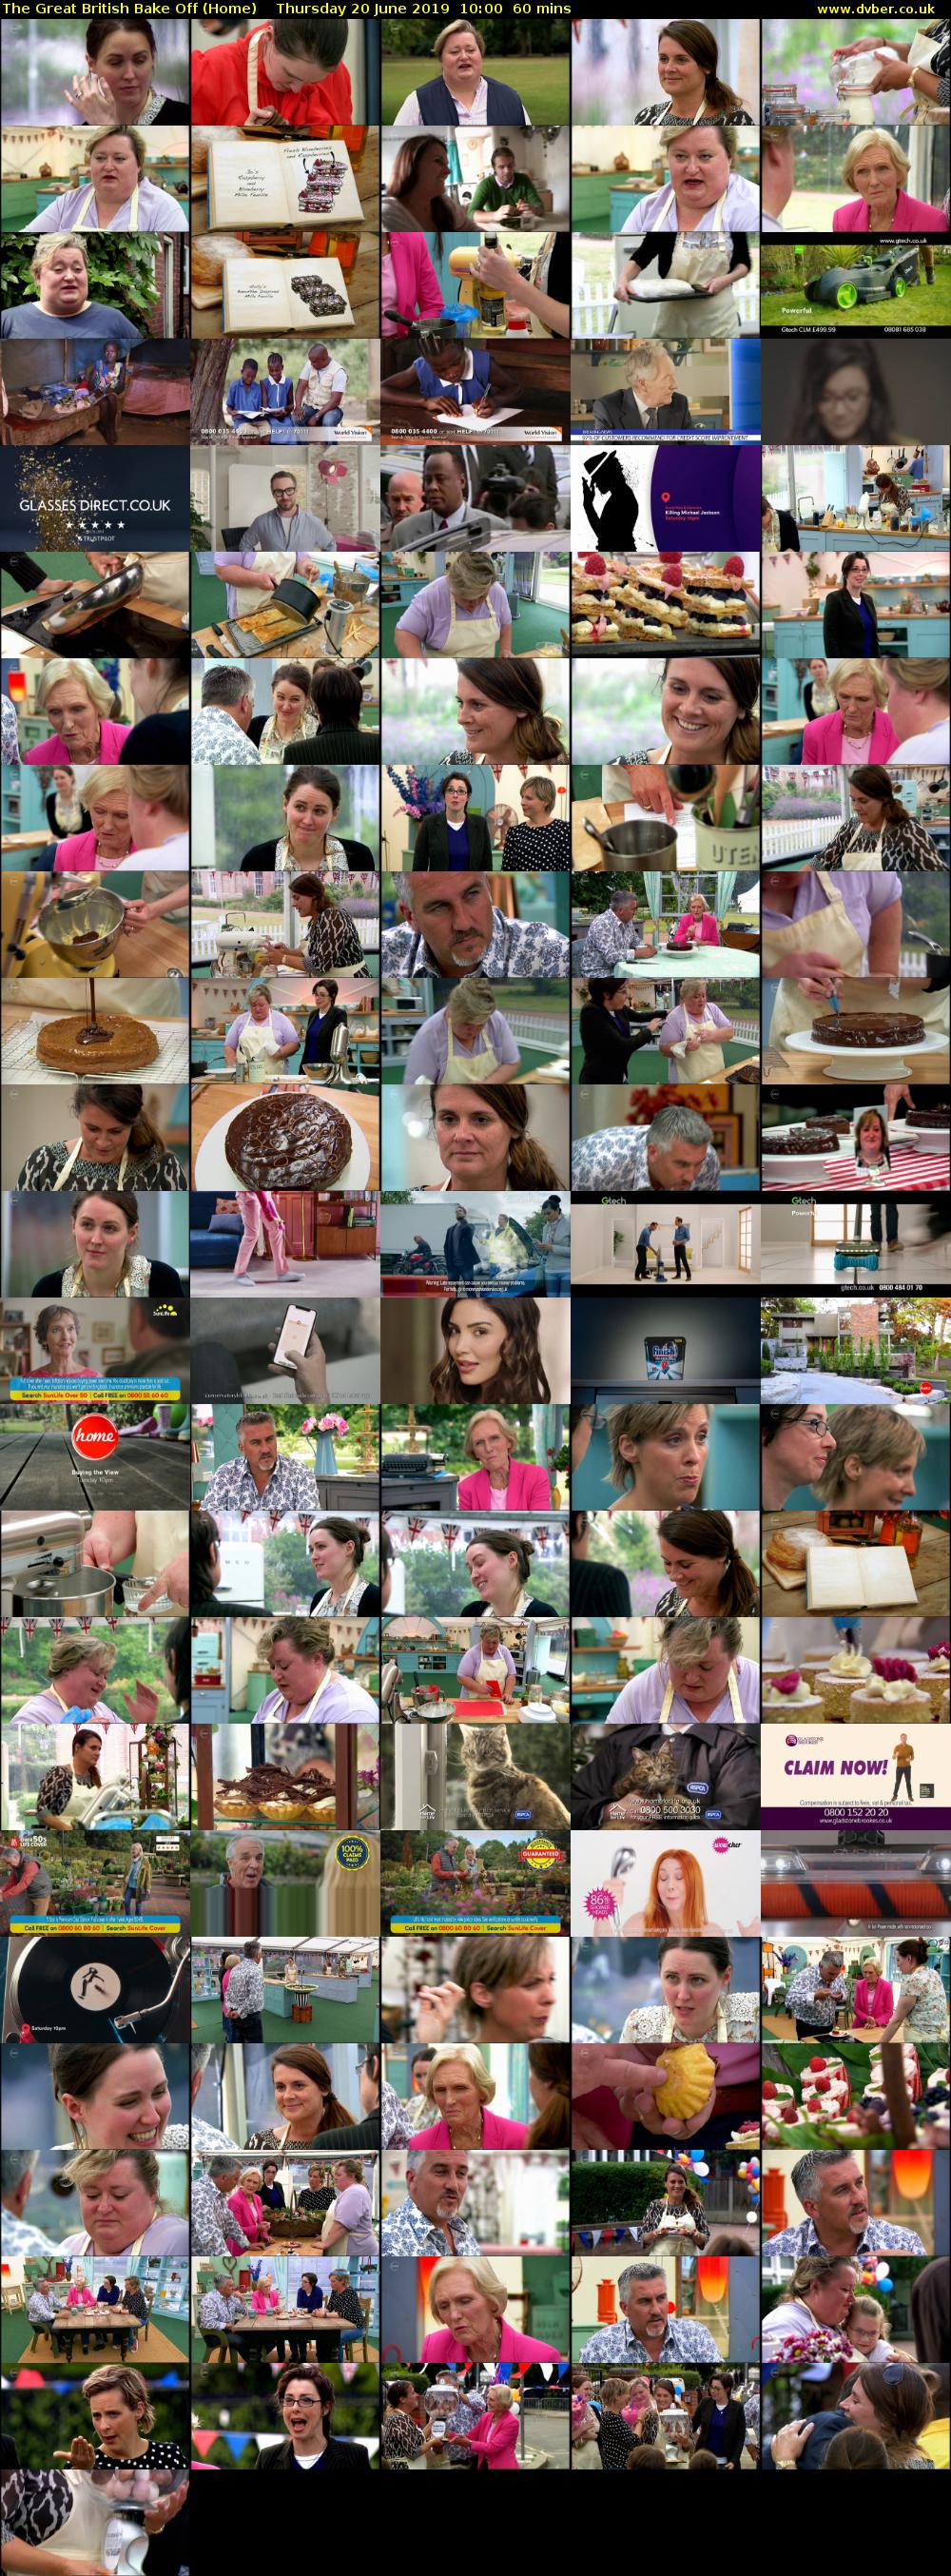 The Great British Bake Off (Home) Thursday 20 June 2019 10:00 - 11:00